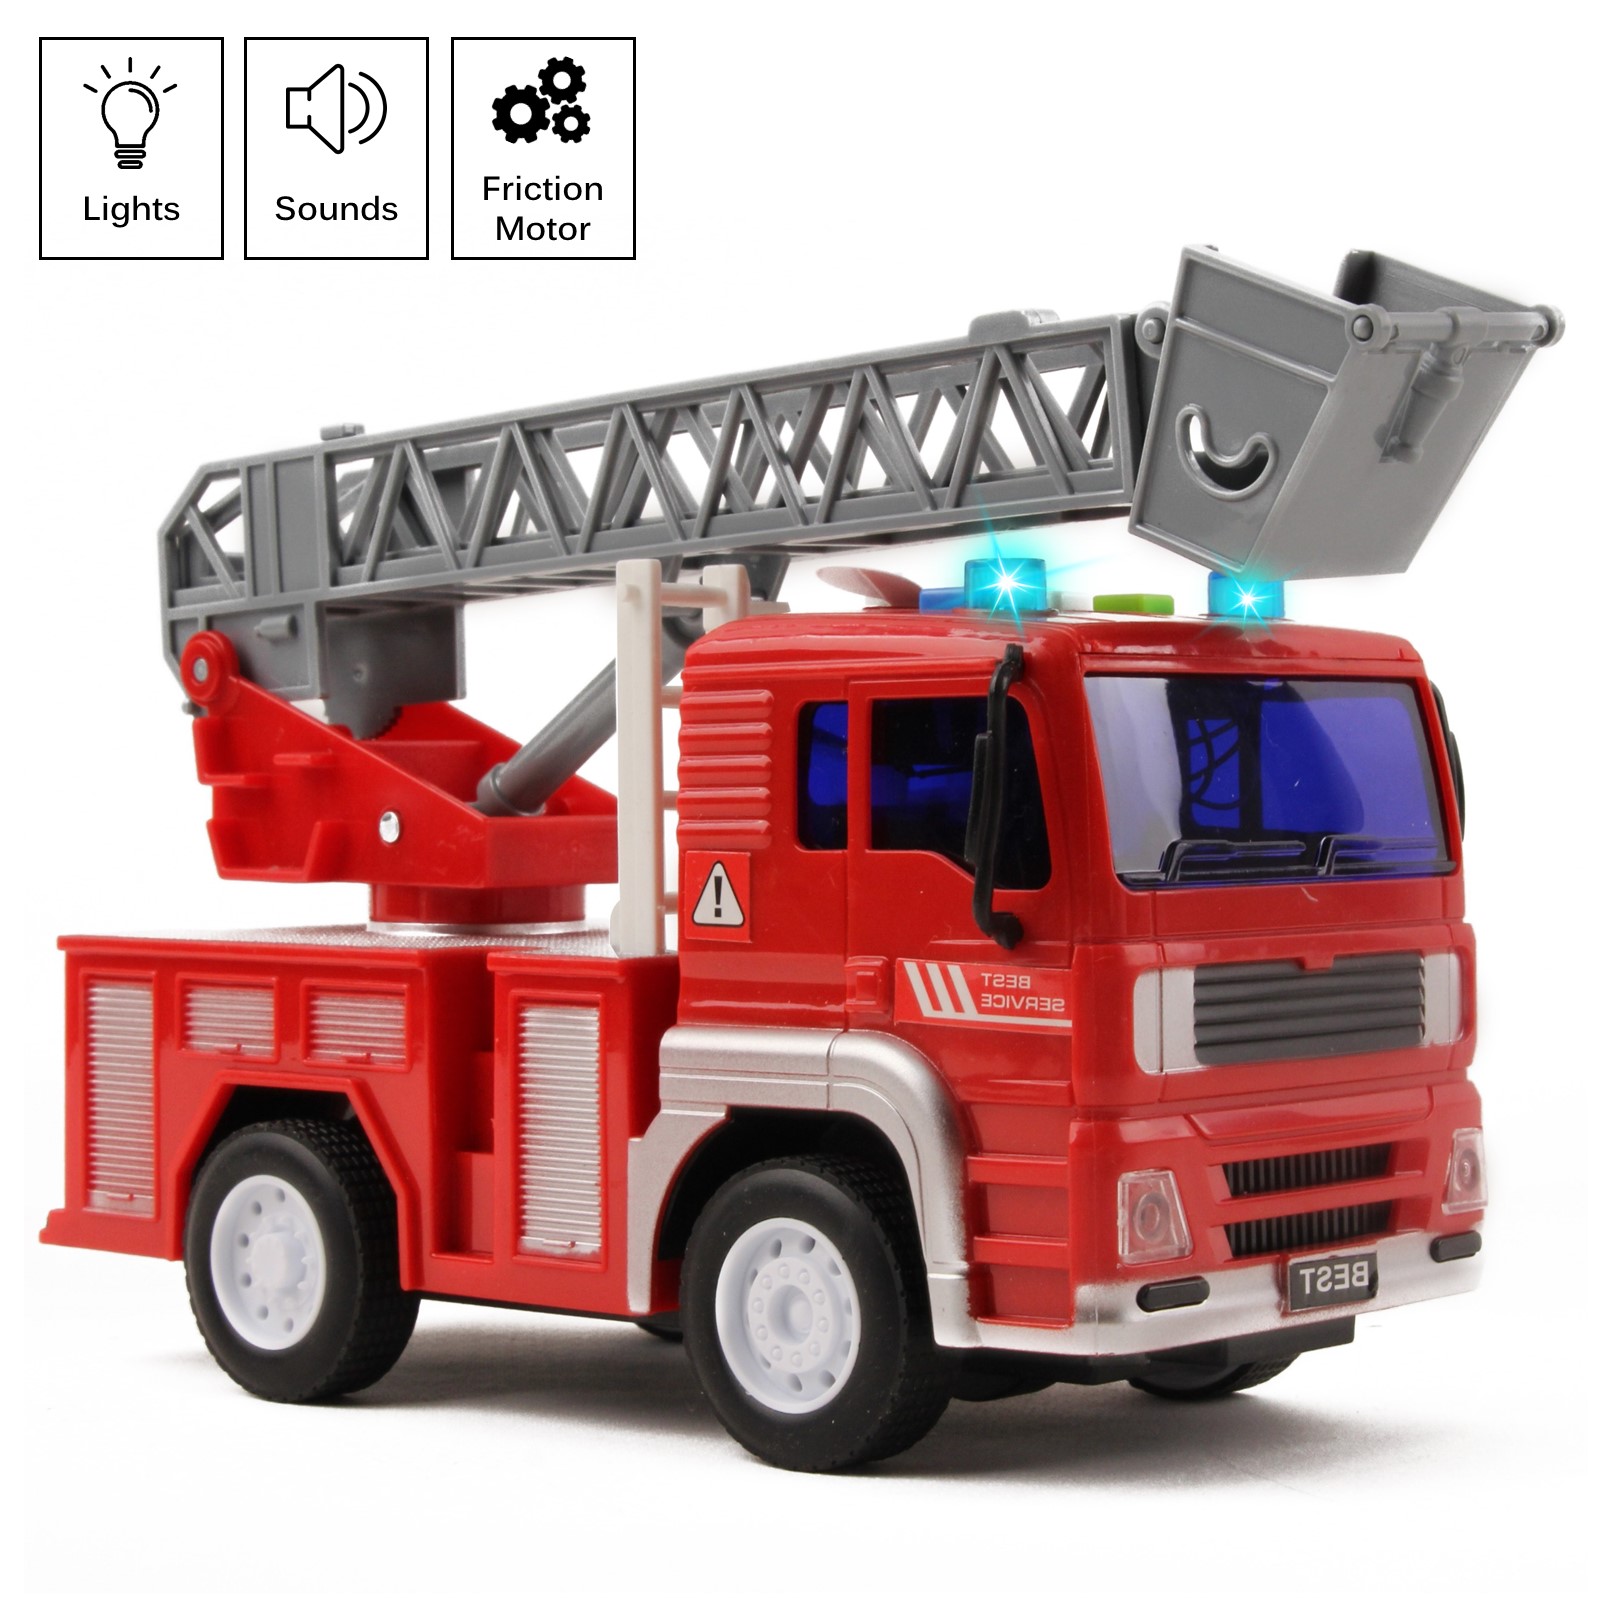 Fire Truck Rescue With Lights And Sounds 125 Extending Ladder 360 Rotation Friction Powered Toy Car Kids Push And Go Firetruck Engine Vehicle Pretend Play Great Gift For Children Boys Girls